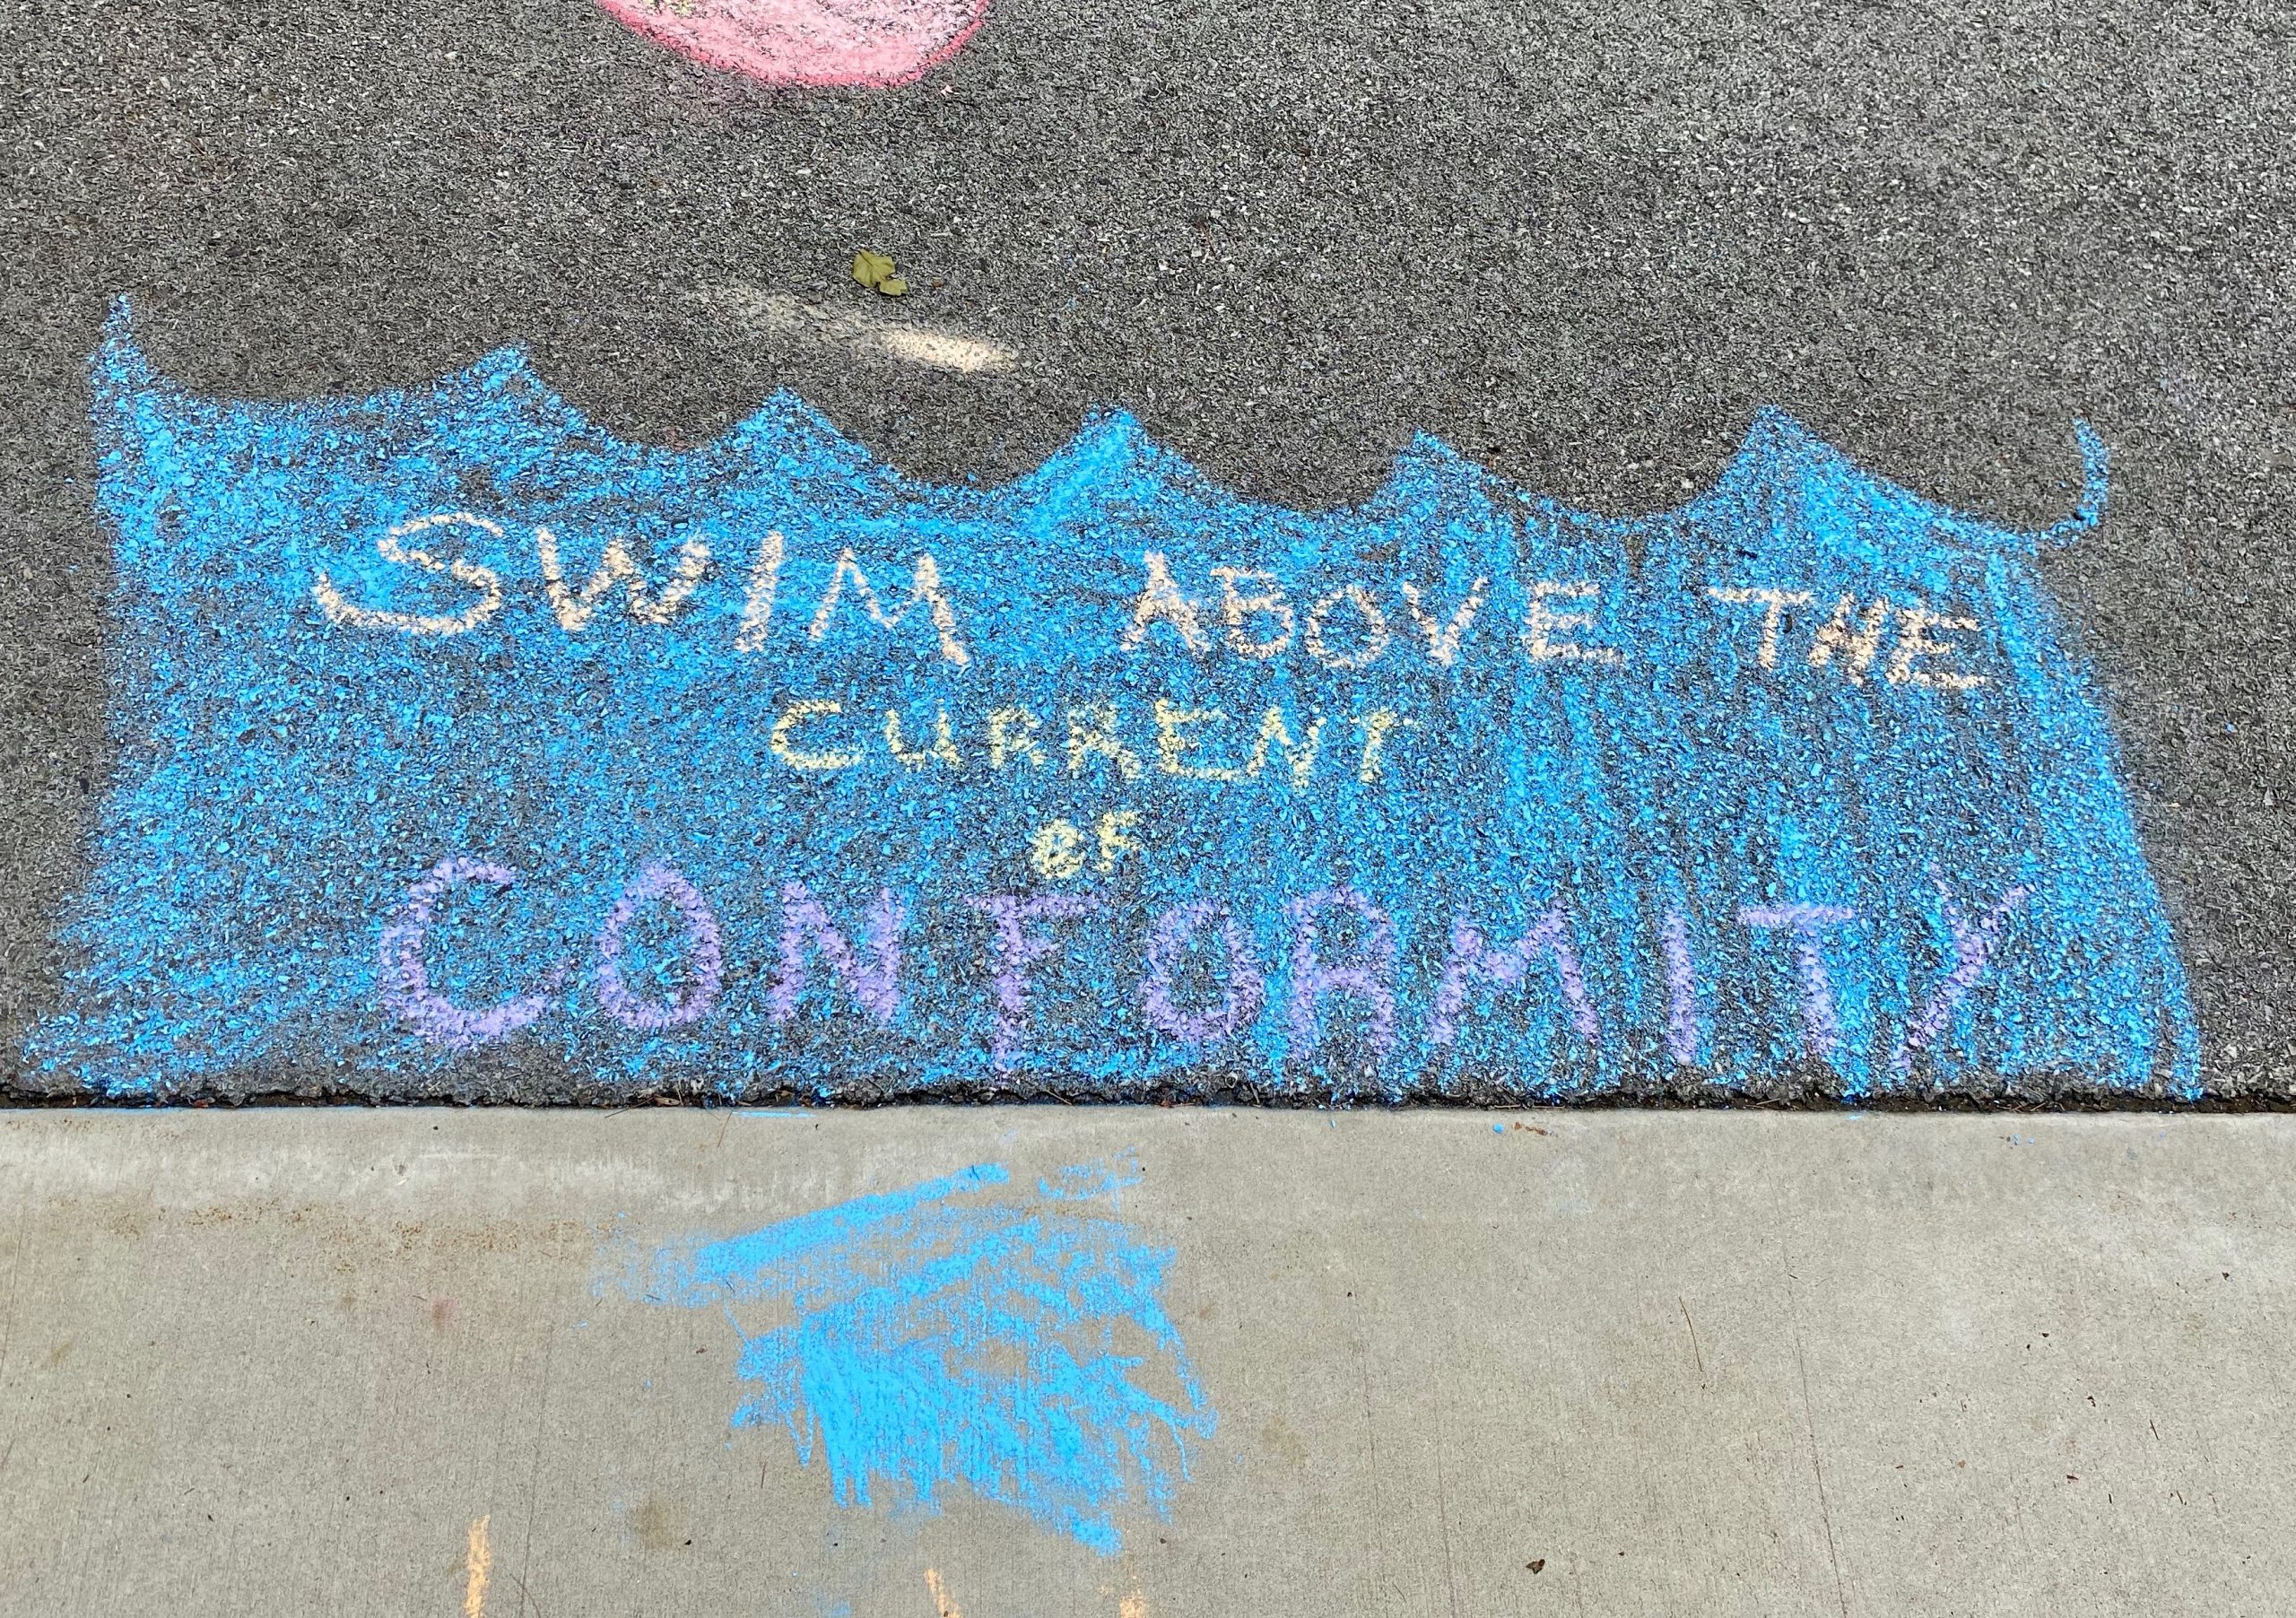 Image of water with the words "Swim Above the Current of Conformity"